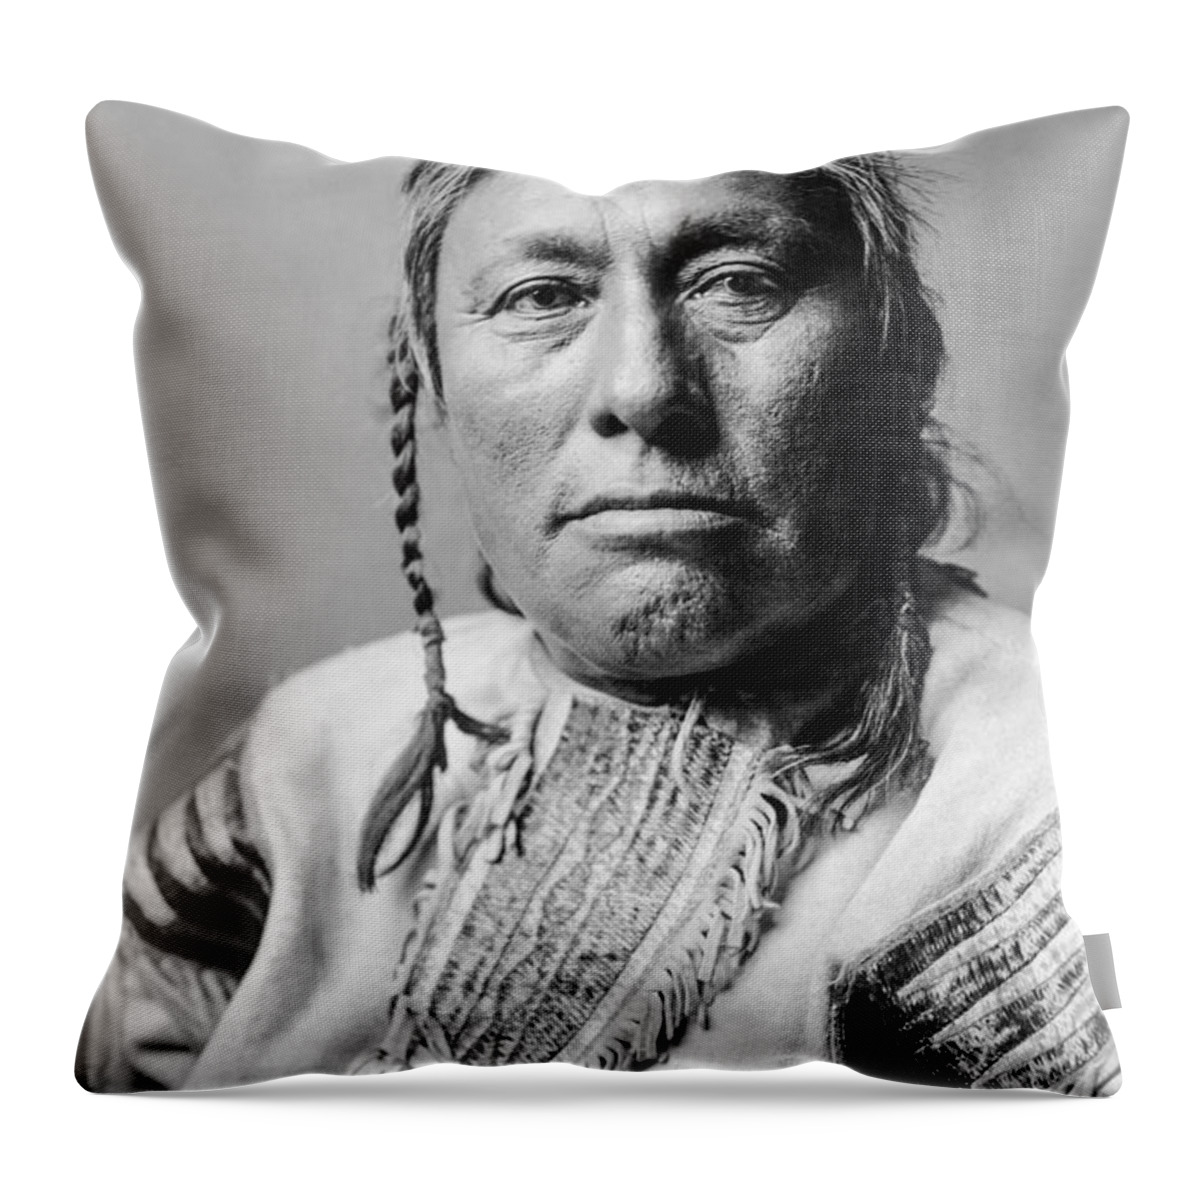 1908 Throw Pillow featuring the photograph Hidatsa Indian Man circa 1908 by Aged Pixel